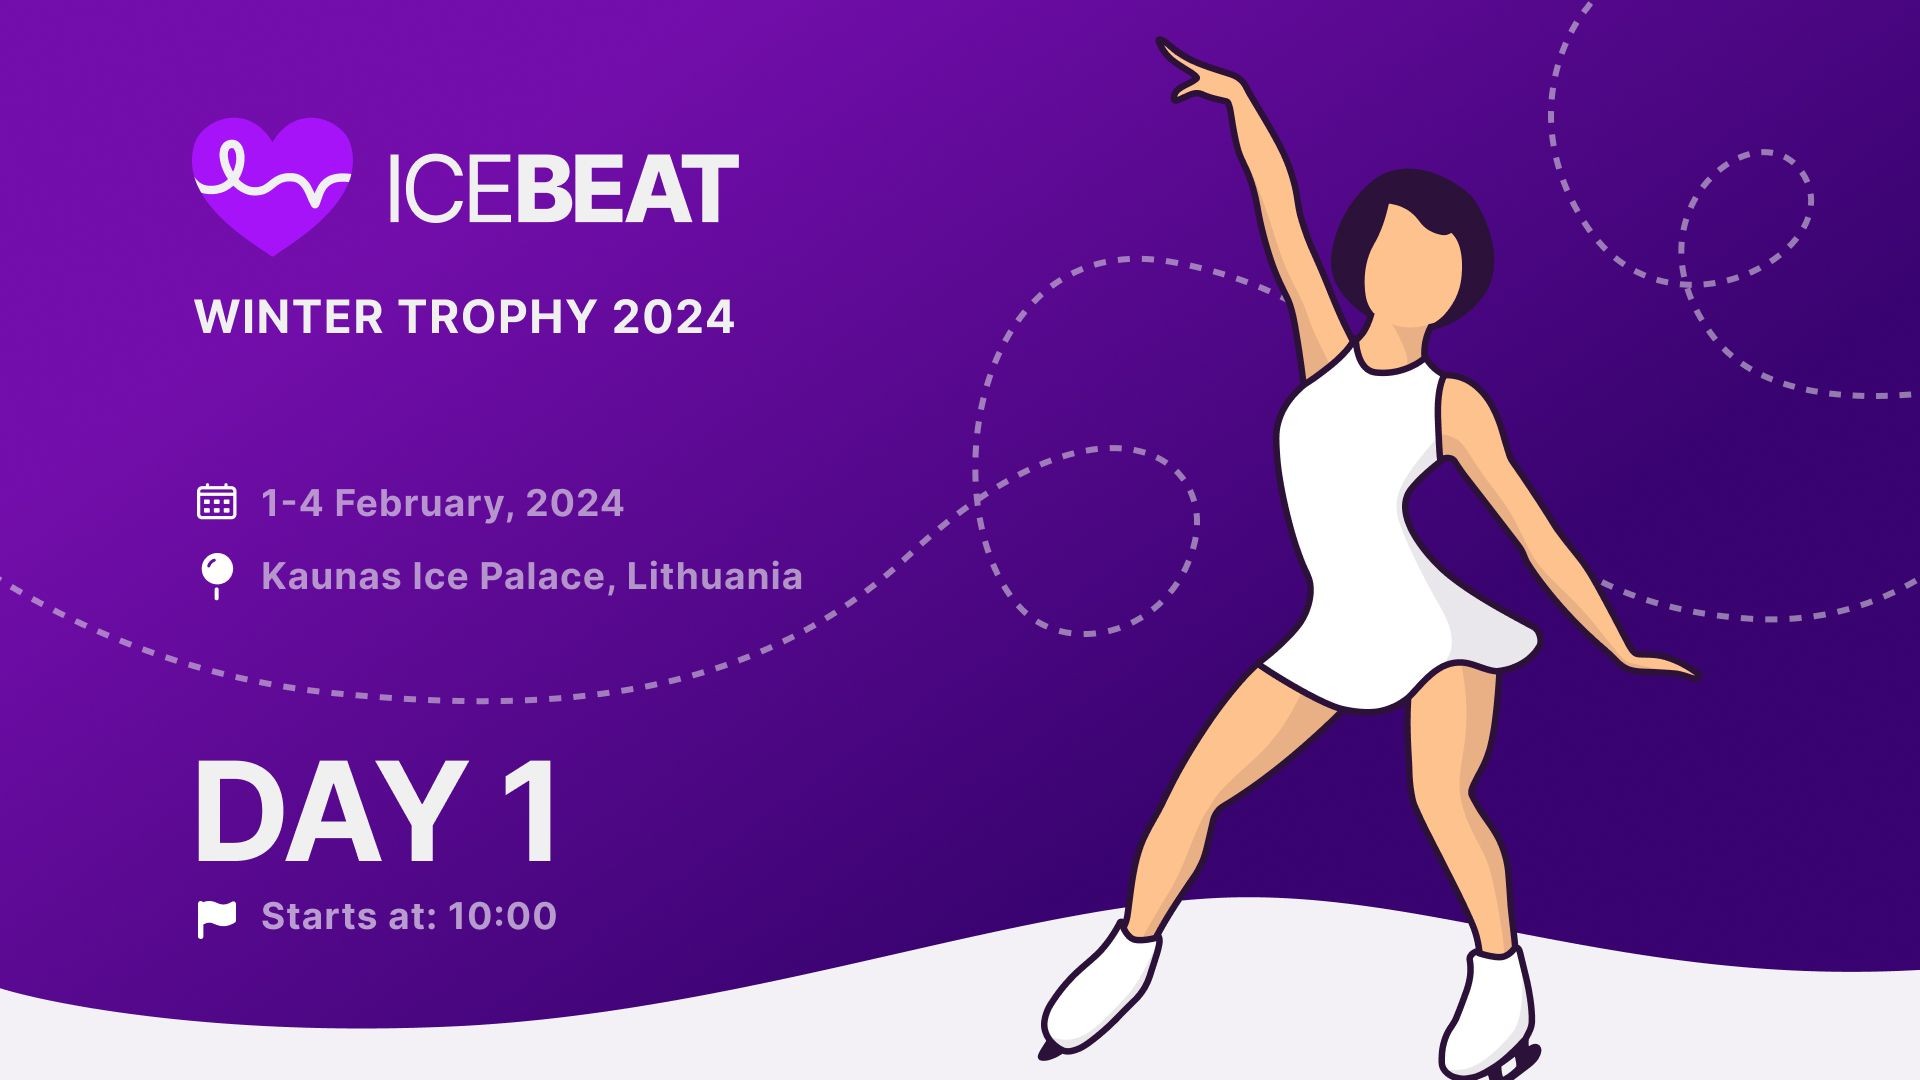 DAY 1 - ICEBEAT WINTER TROPHY 2024